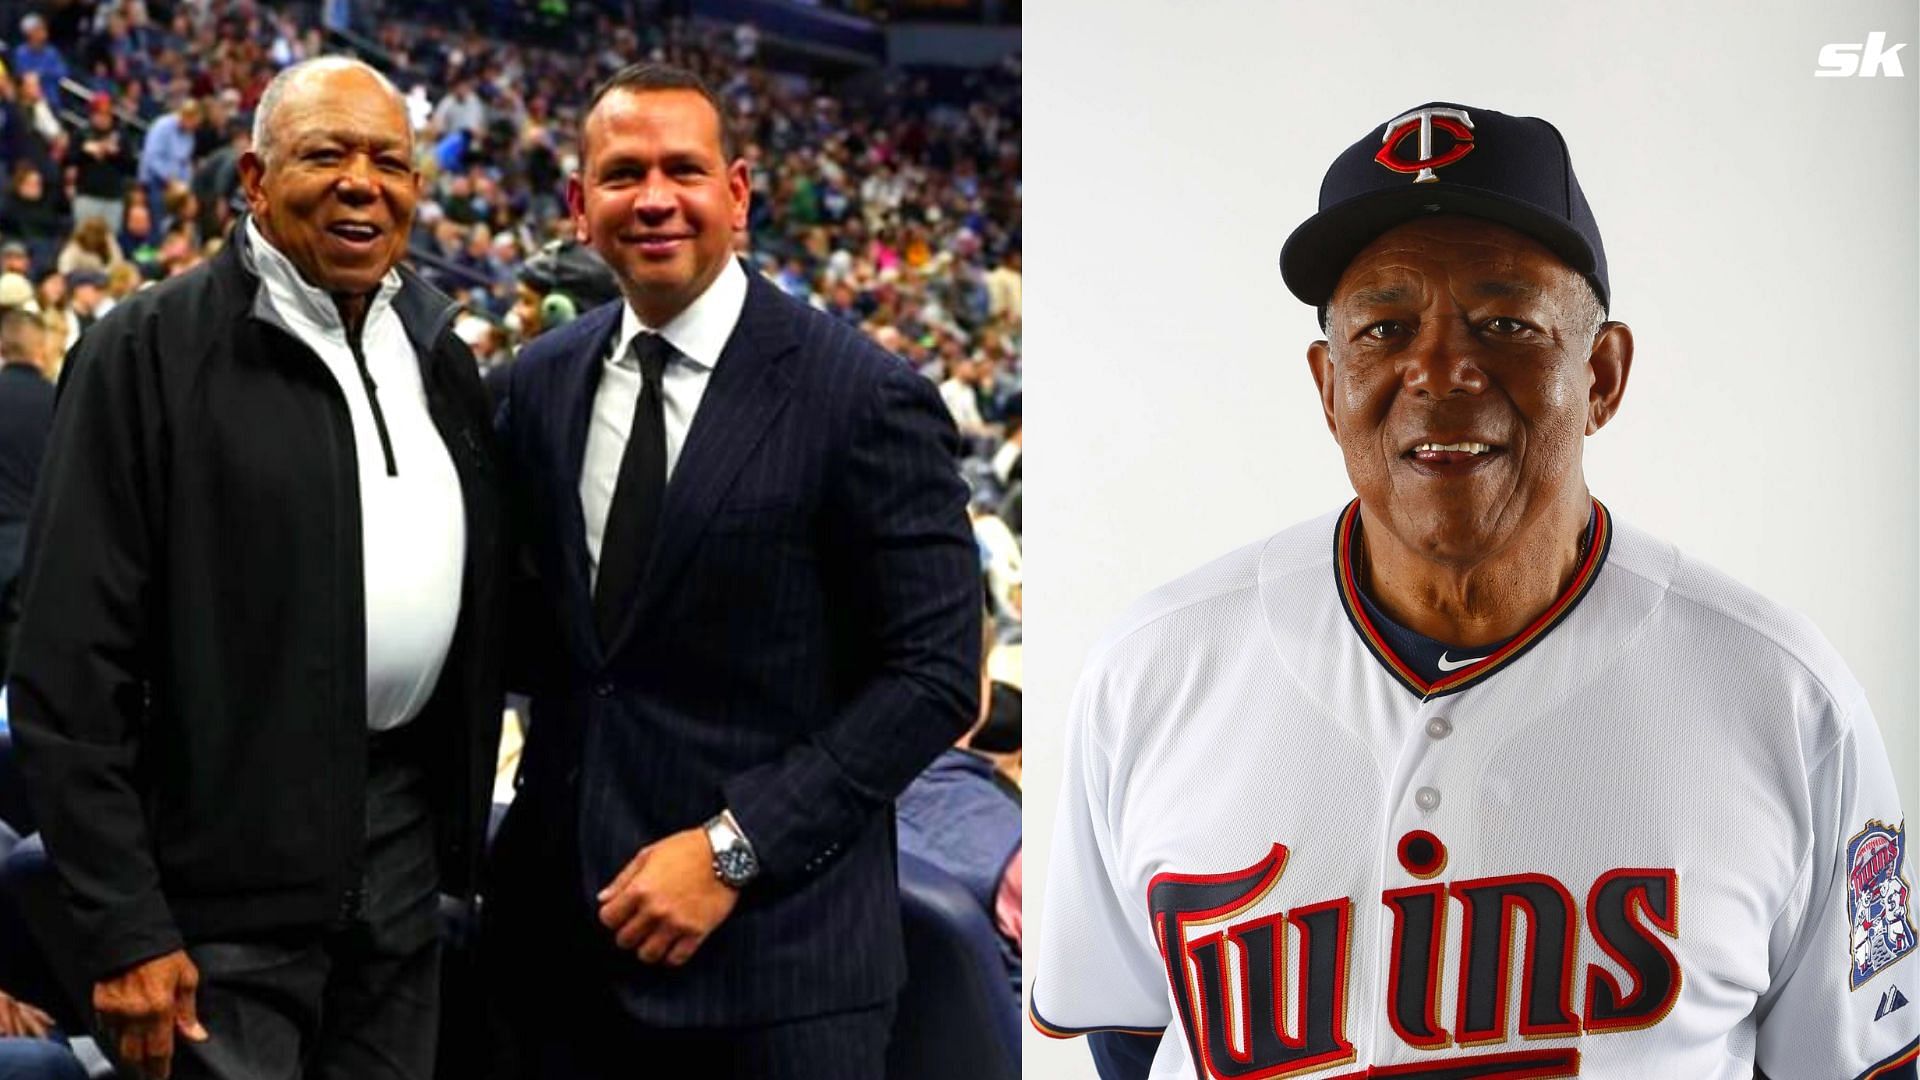 Alex Rodriguez with Tony Oliva at the NBA game. 